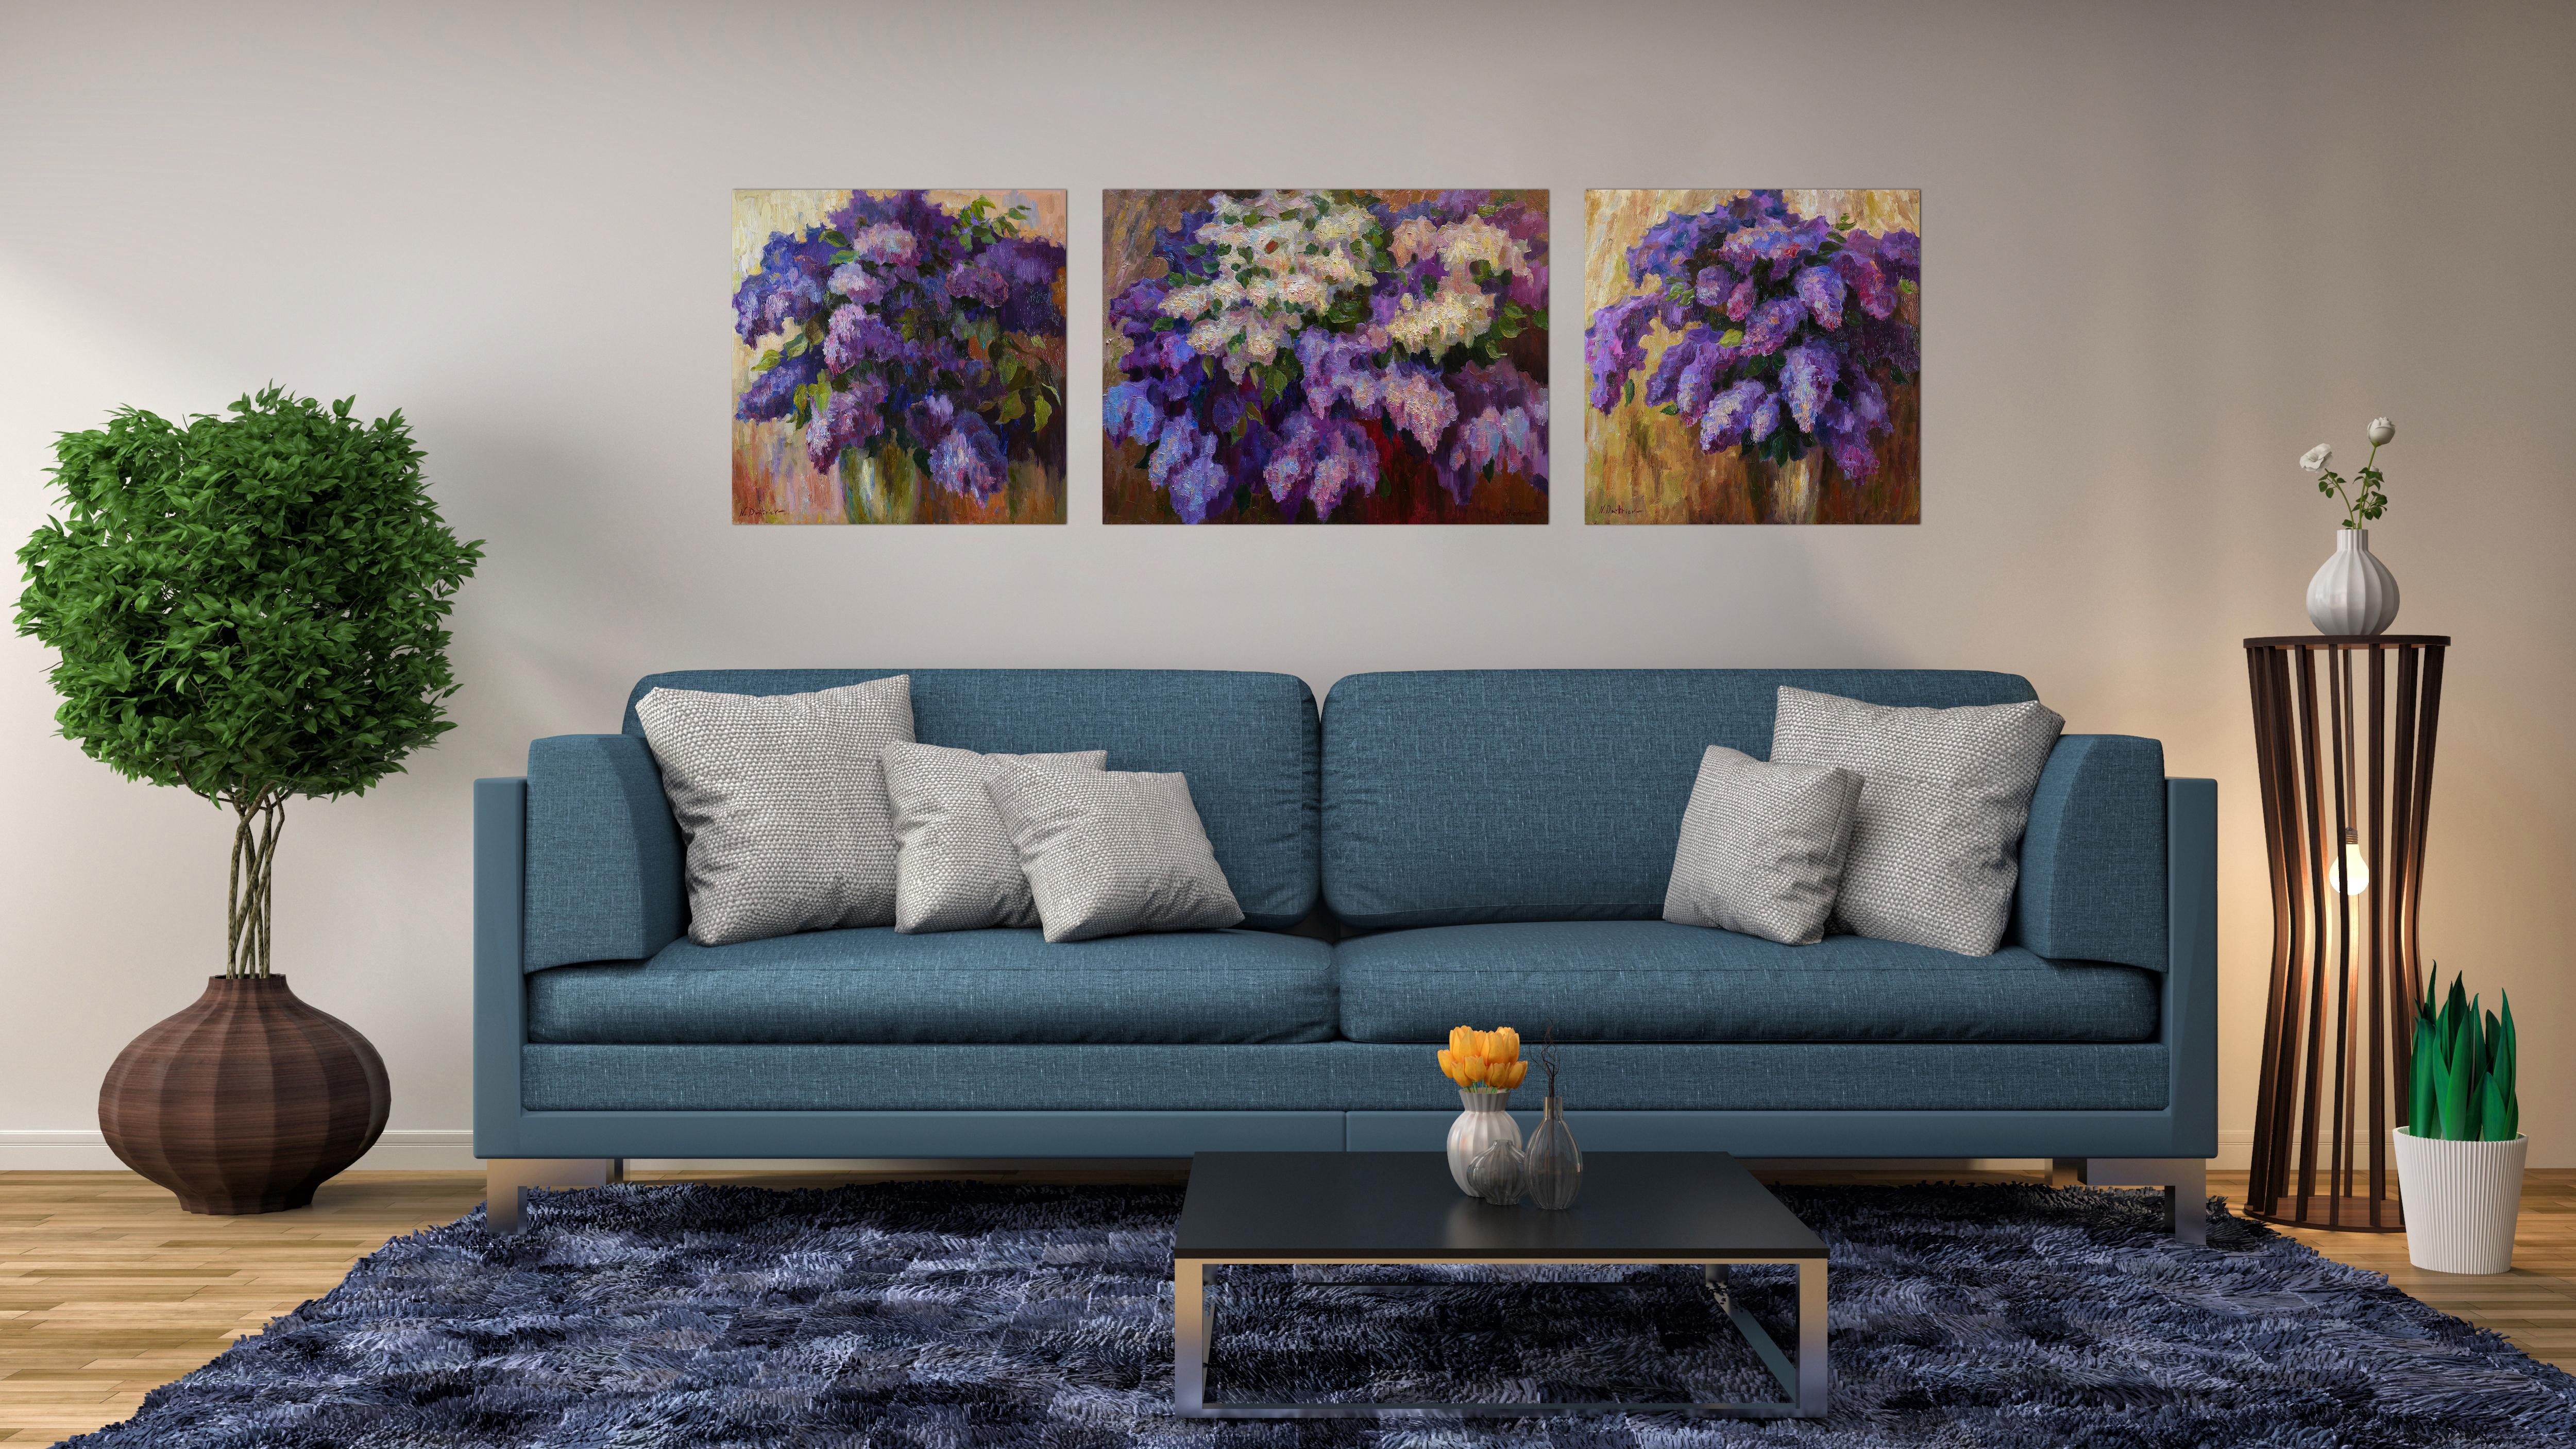 Nikolay Dmitriev Interior Painting - Three Lilacs Paintings - Abstract Floral Triptych